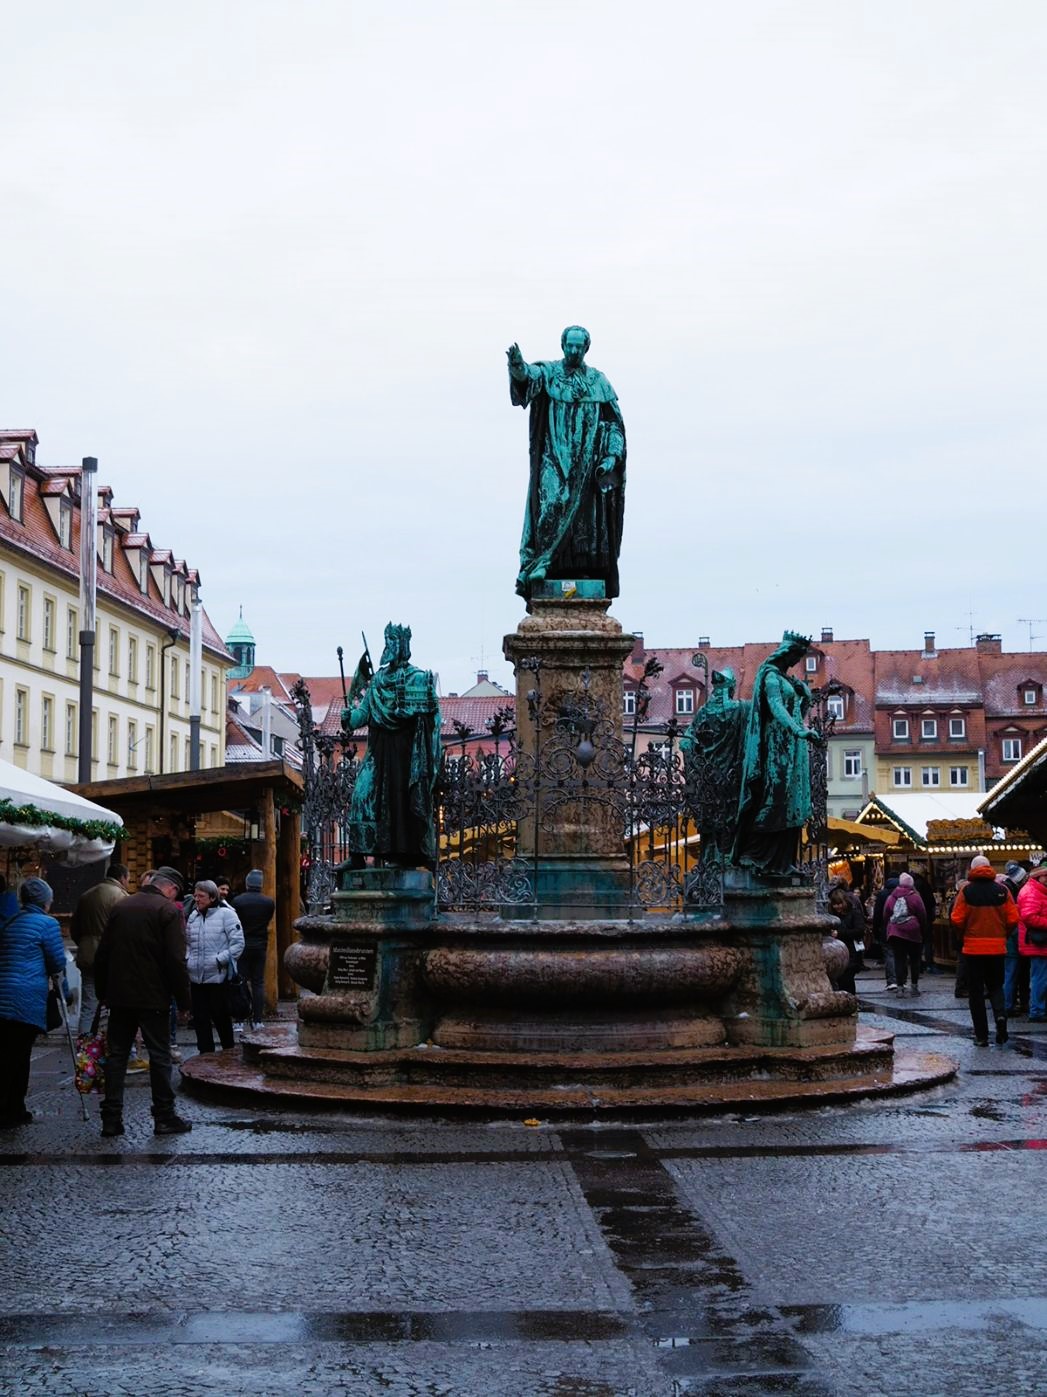 A large fountain is shown topped with five blue green copper statues in various poses, one is higher than the other four with his arm raised. Behind the fountain, crowds enjoy Bamberg's Christmas market in Maximilianplatz.